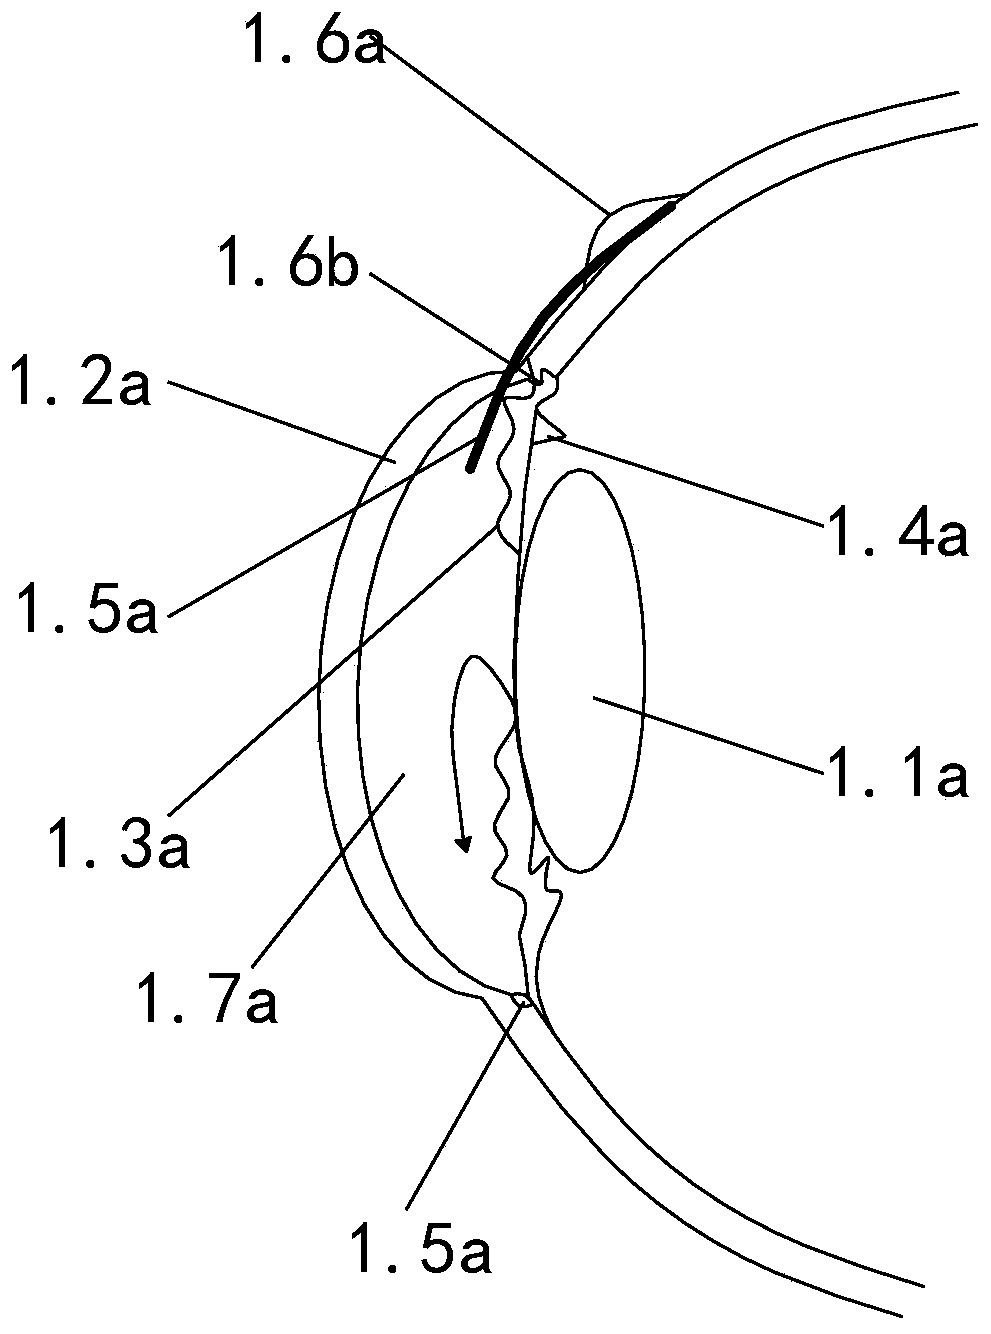 Front-arranged adjustable electromagnetic drainage valve for treating glaucoma